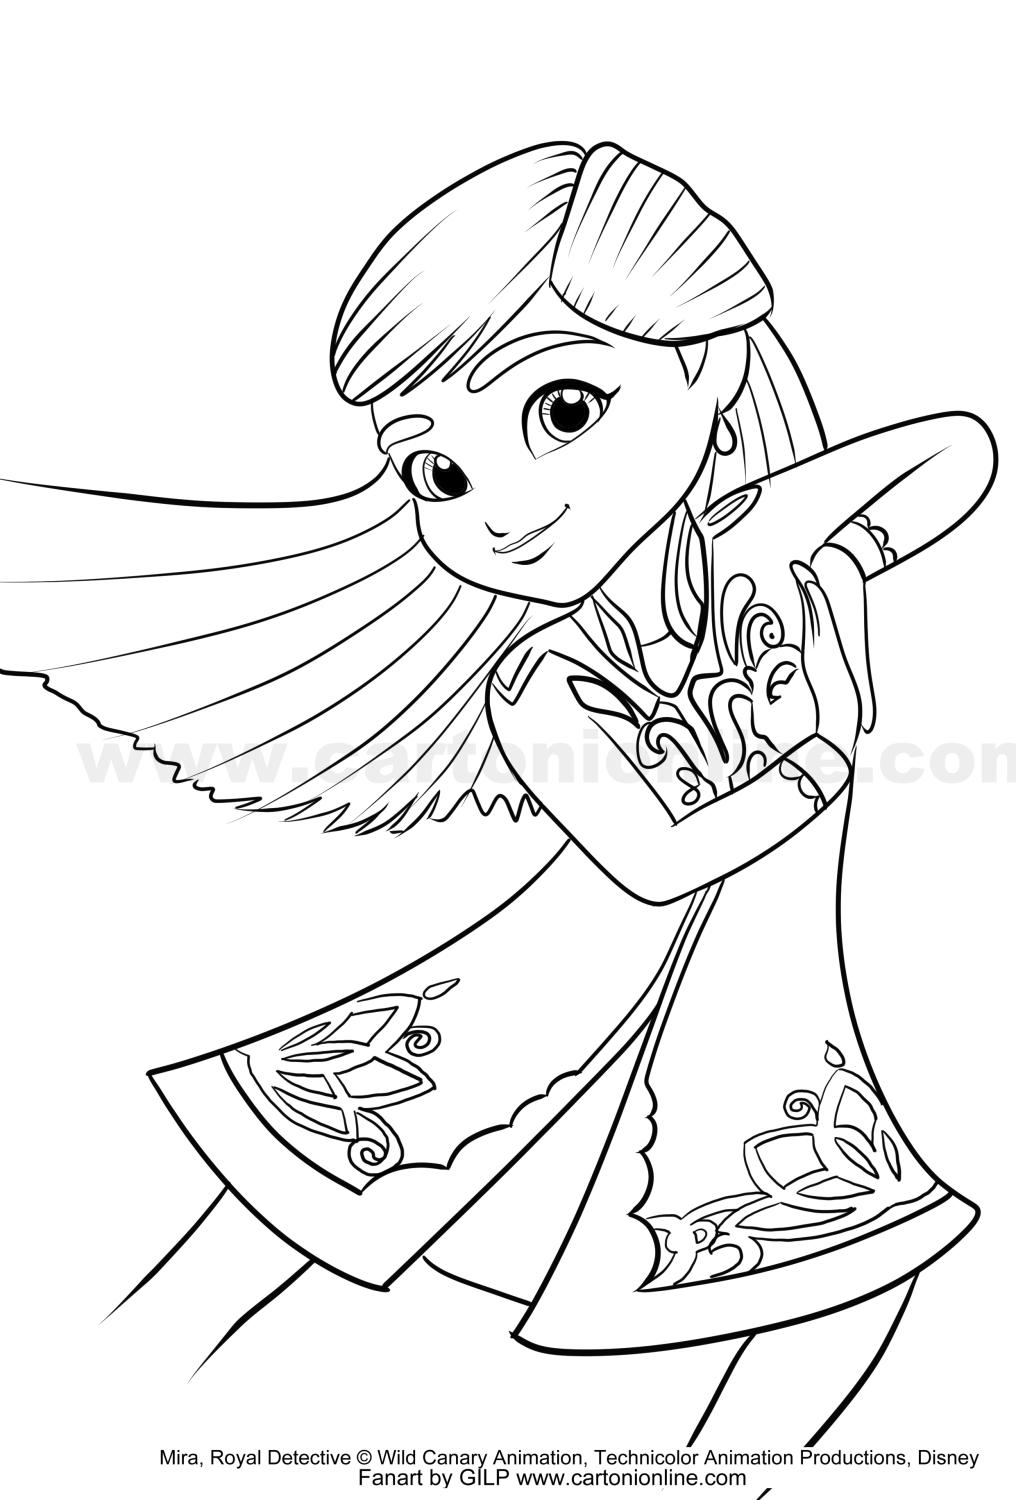 Mira von Mira, Royal Detective coloring page to print and coloring